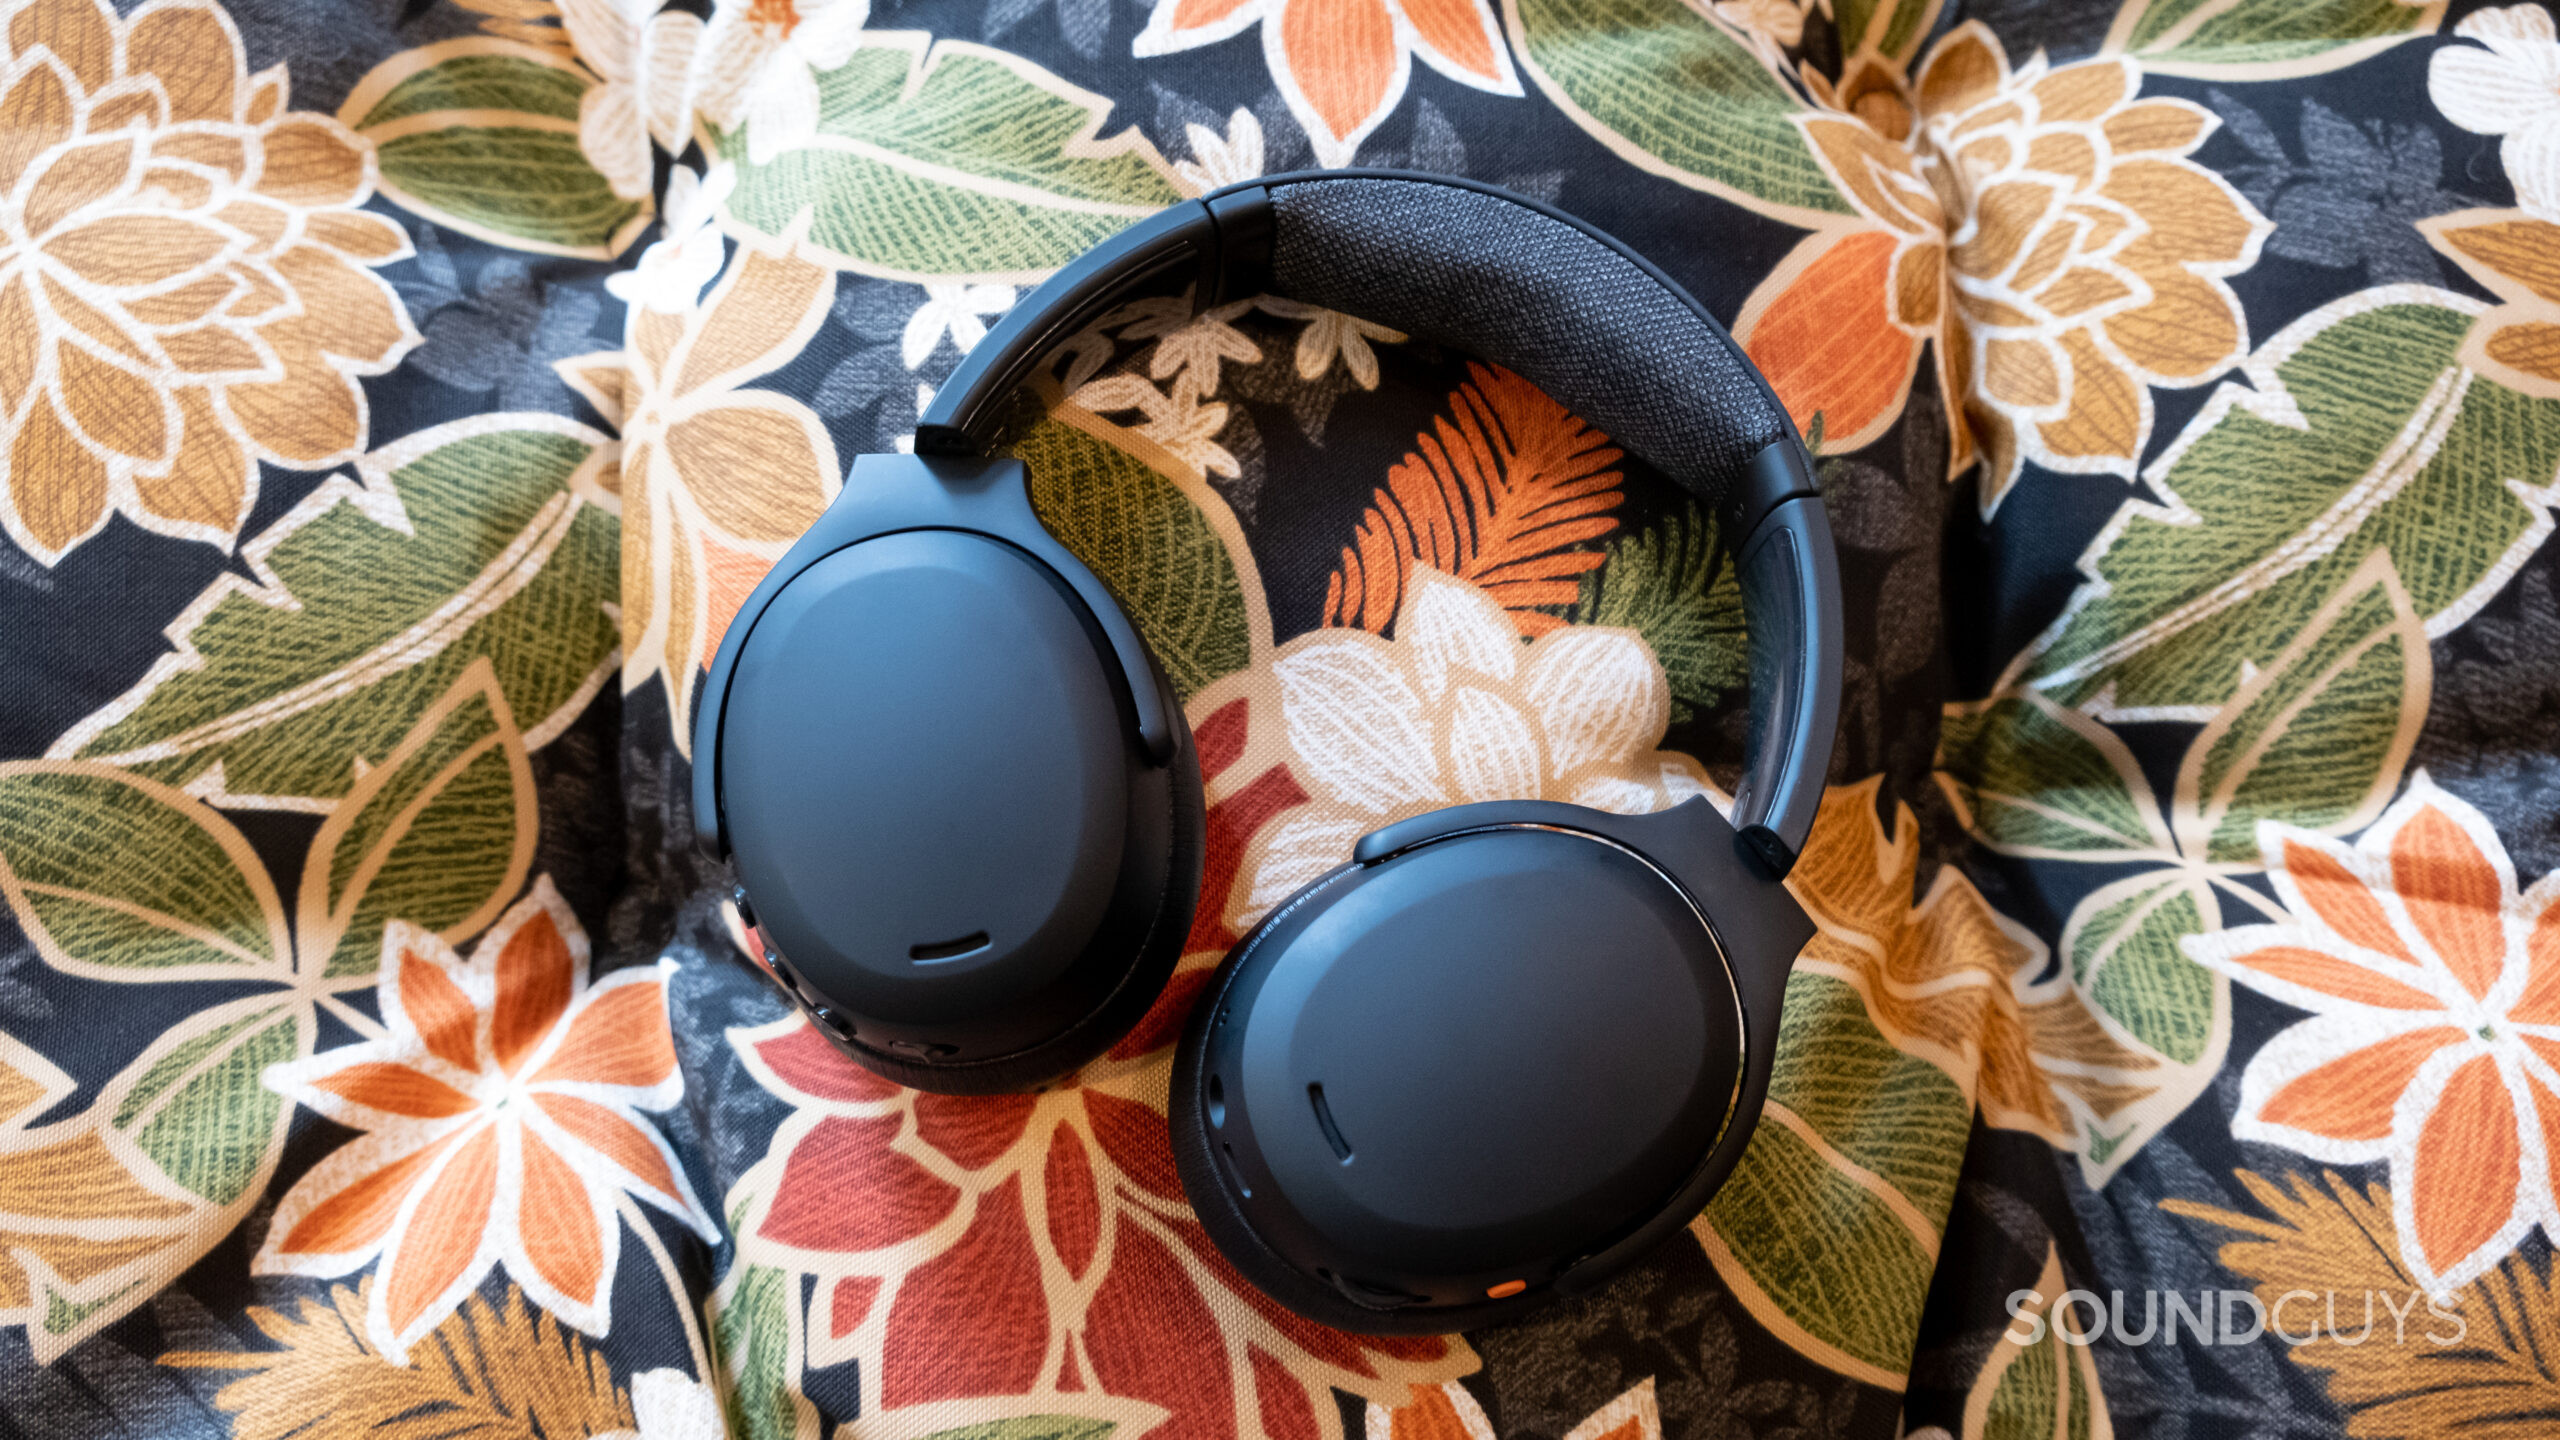 A centered photo of the Skullcandy Crusher ANC 2 against a floral background fabric.